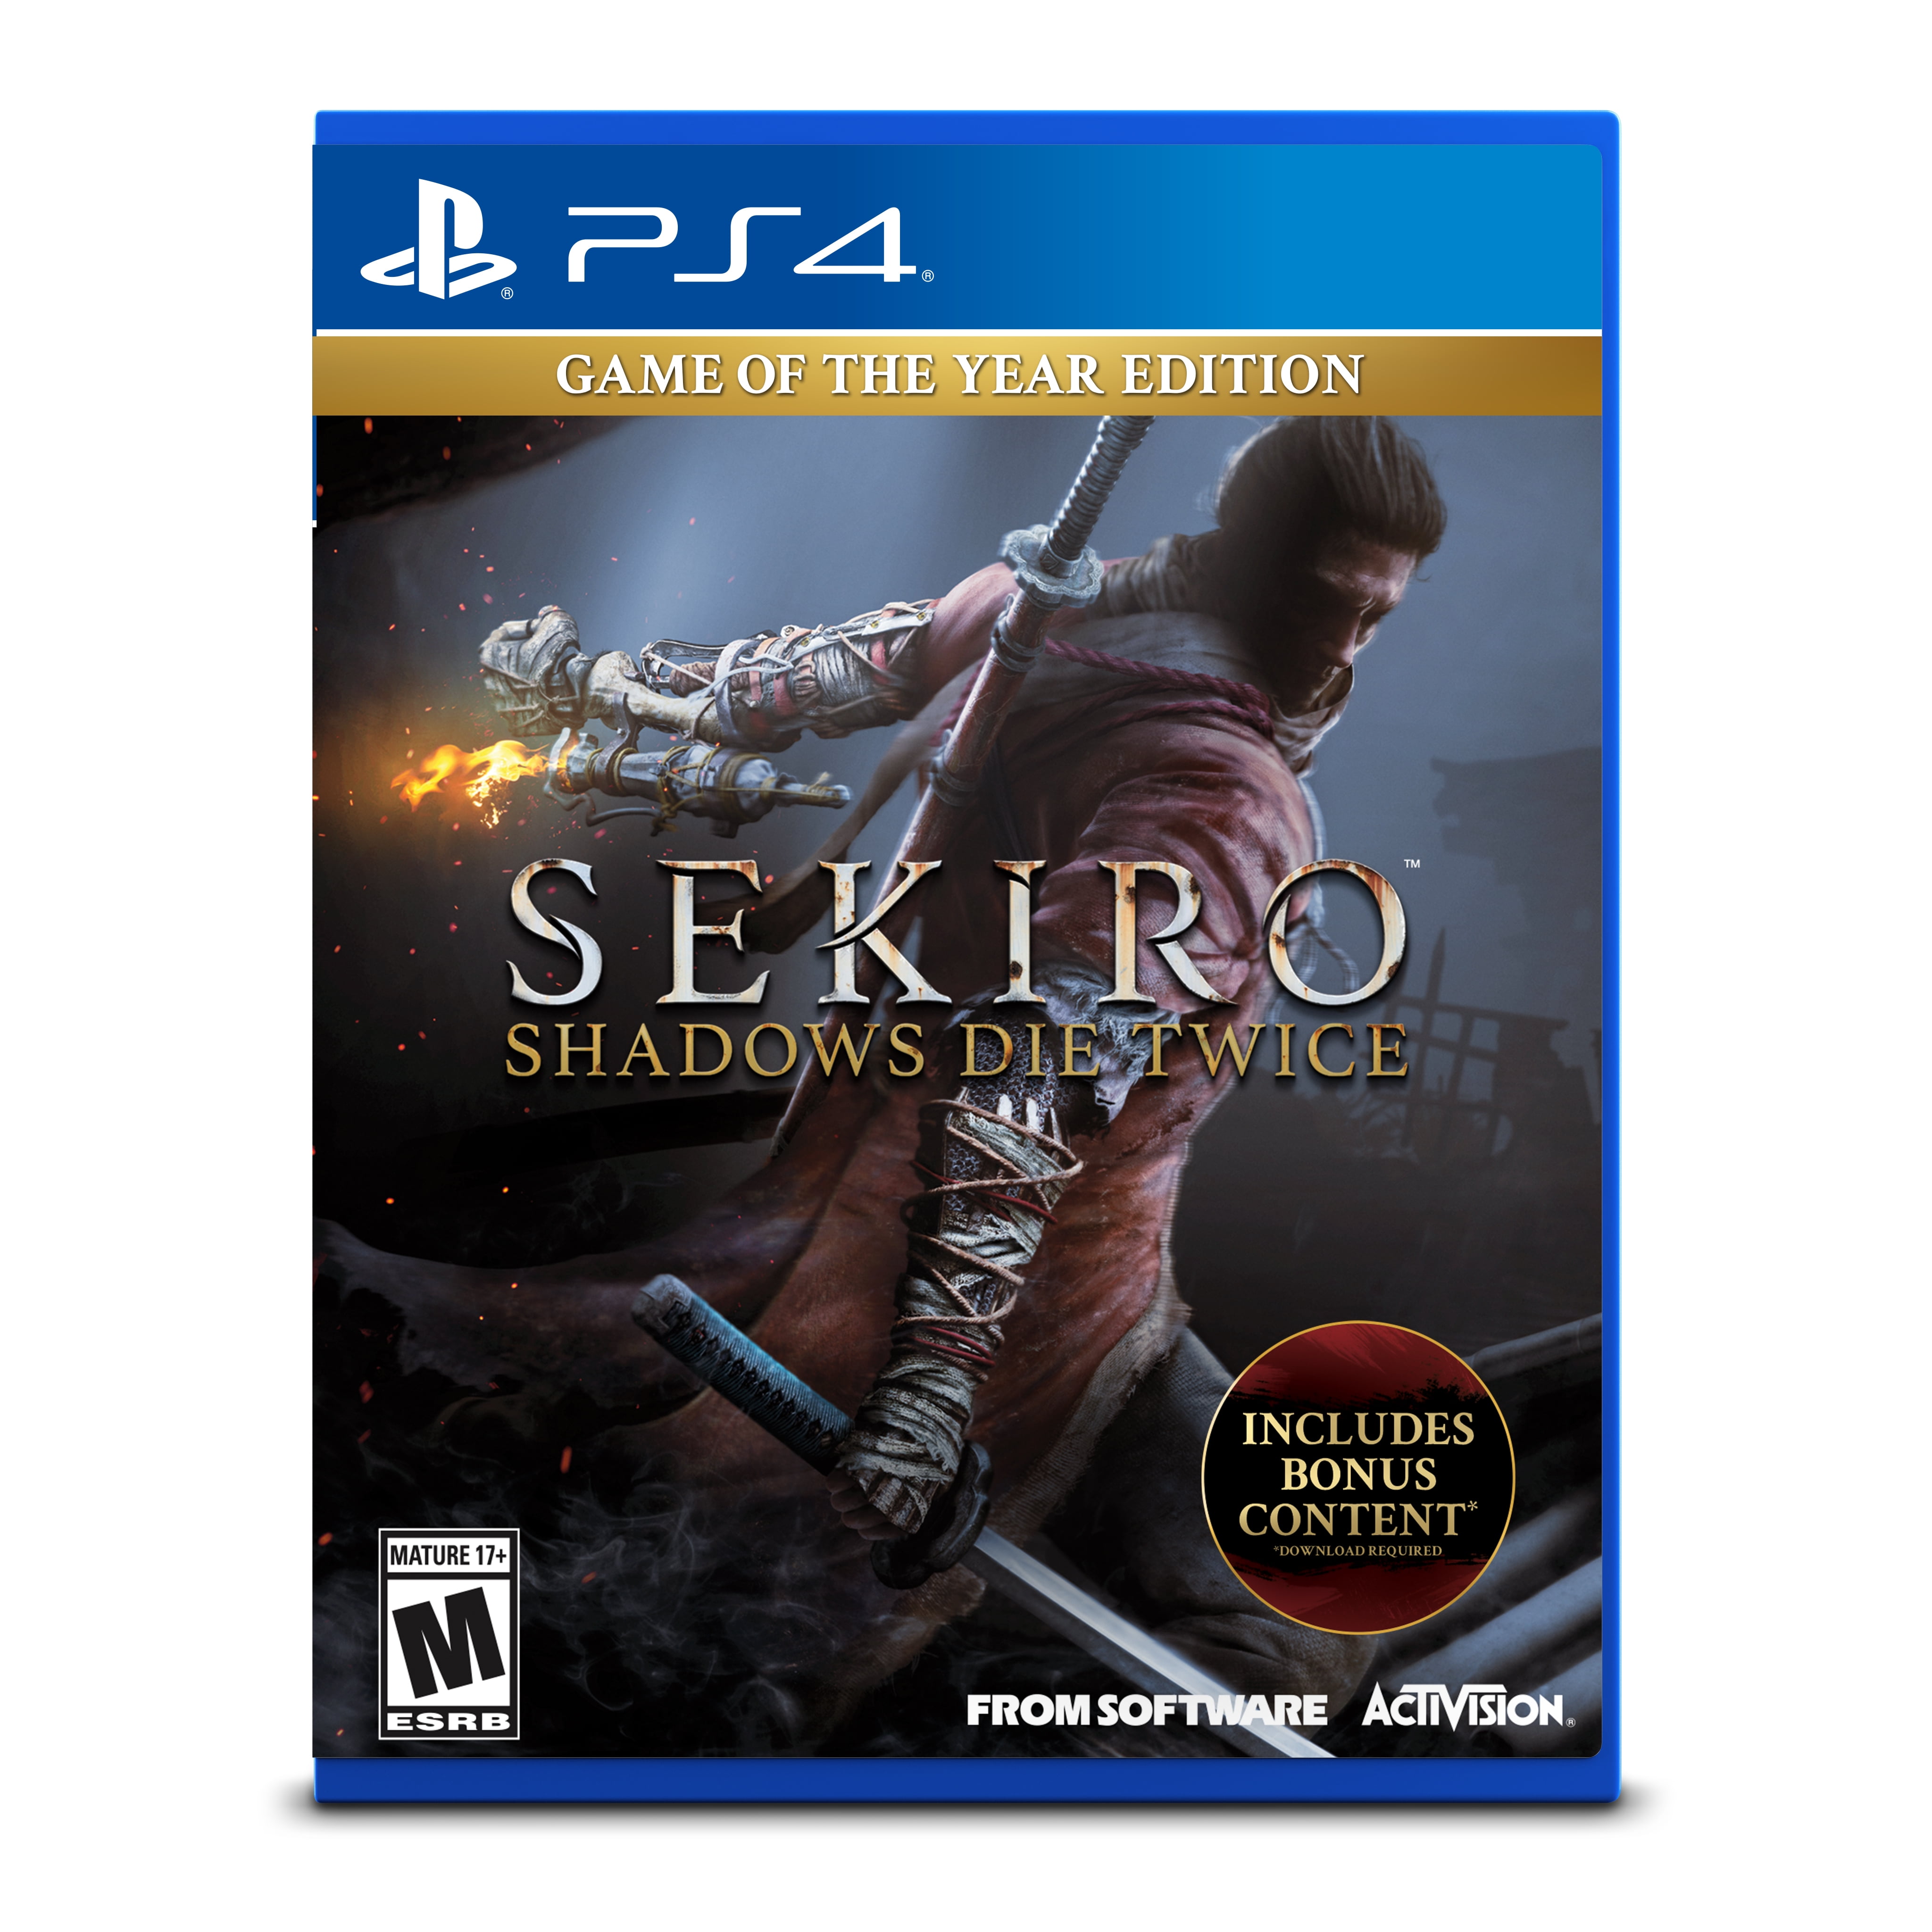 Sekiro Shadows Die Twice Game of the Year Edition - PS4 - New, Factory  Sealed 47875882928